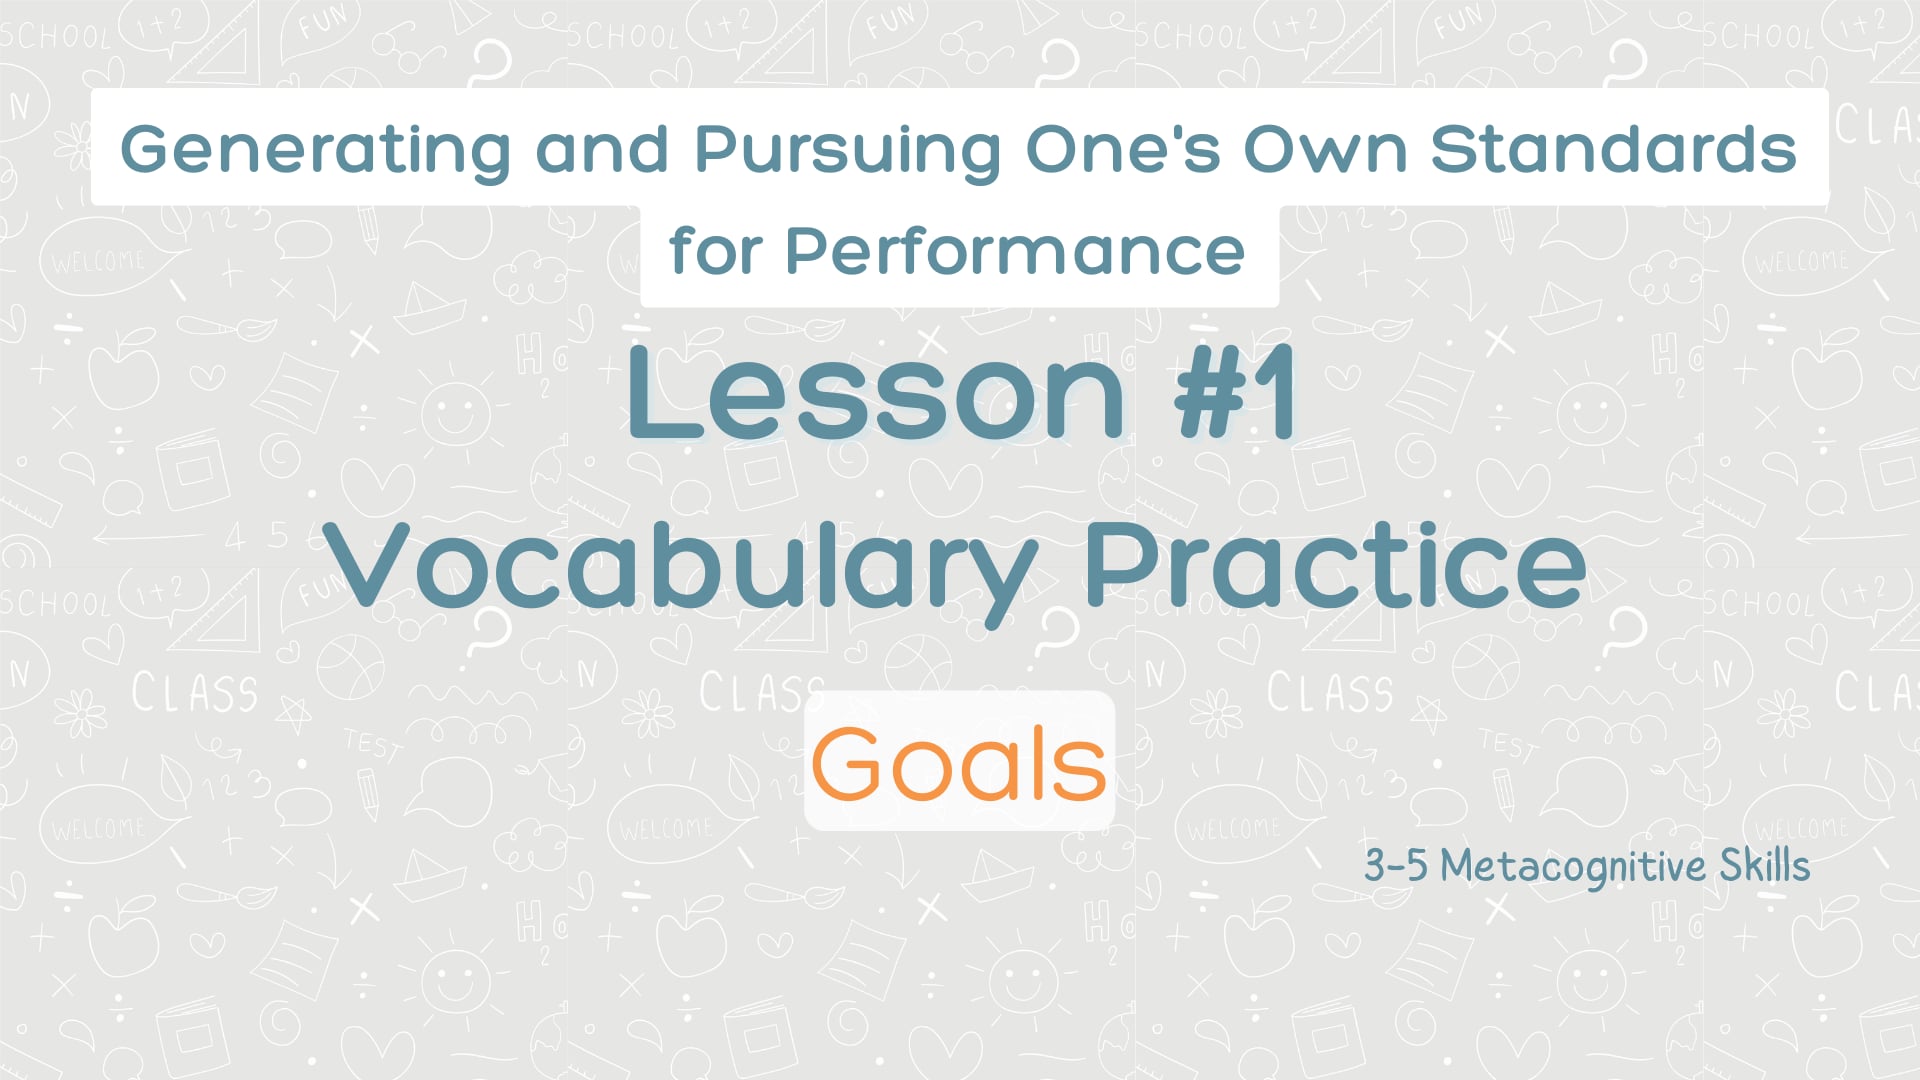 Lesson #1 Vocabulary Practice: Goals video thumbnail